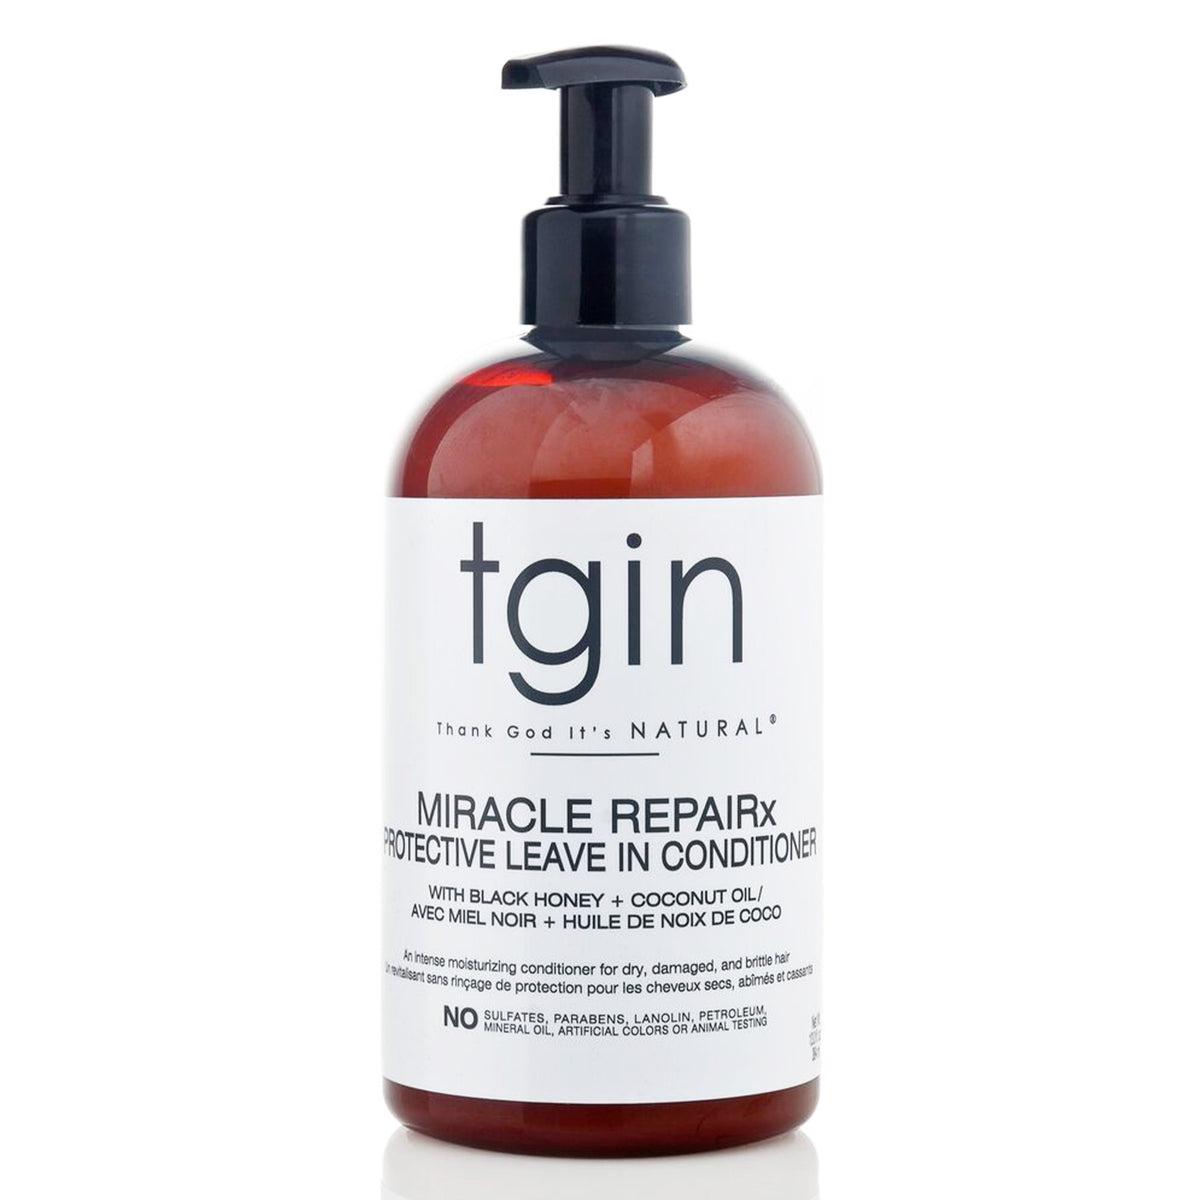 tgin Miracle RepaiRx Protective Leave In Conditioner 12 oz - AQ Online 